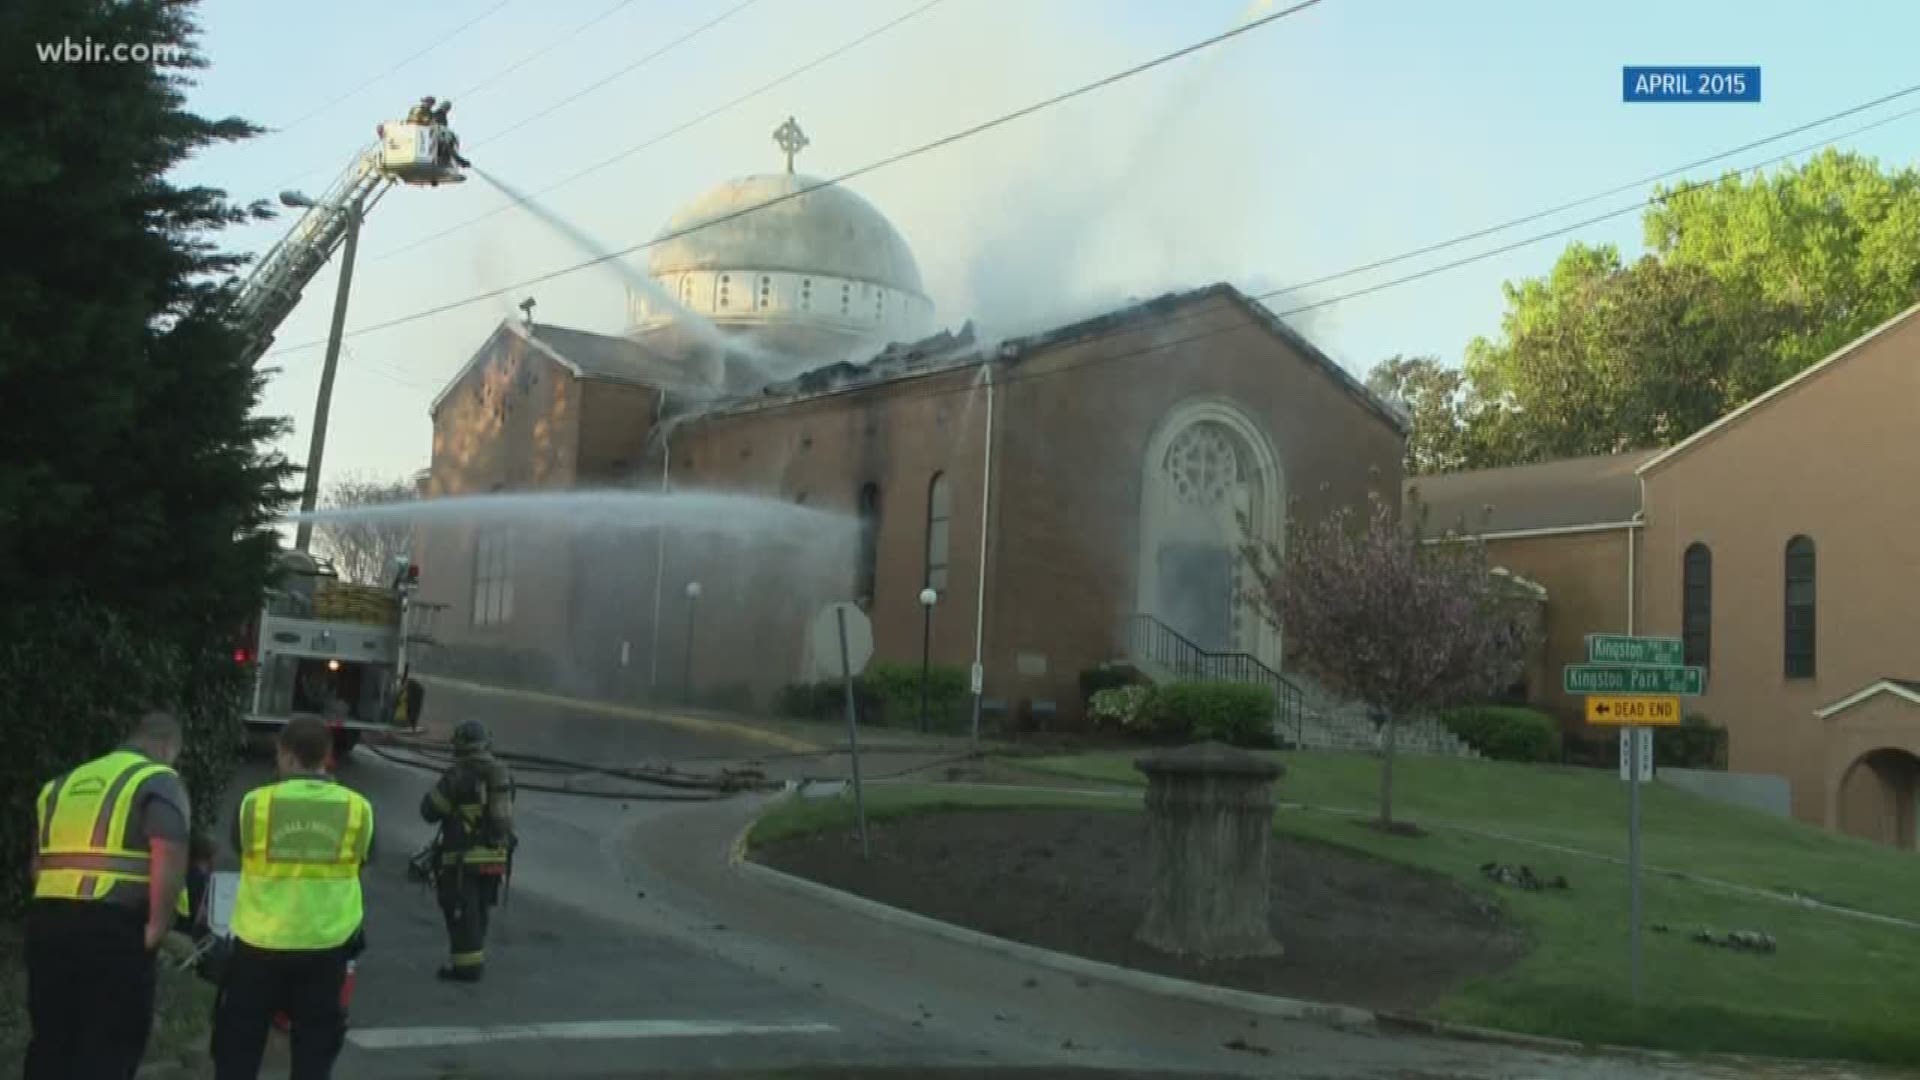 As Parisians grieve over the destruction at Notre Dame--churches here in Knoxville feel their pain. St. George Greek Orthodox Church suffered its own devastating fire and has spent the last four years rebuilding what they lost.